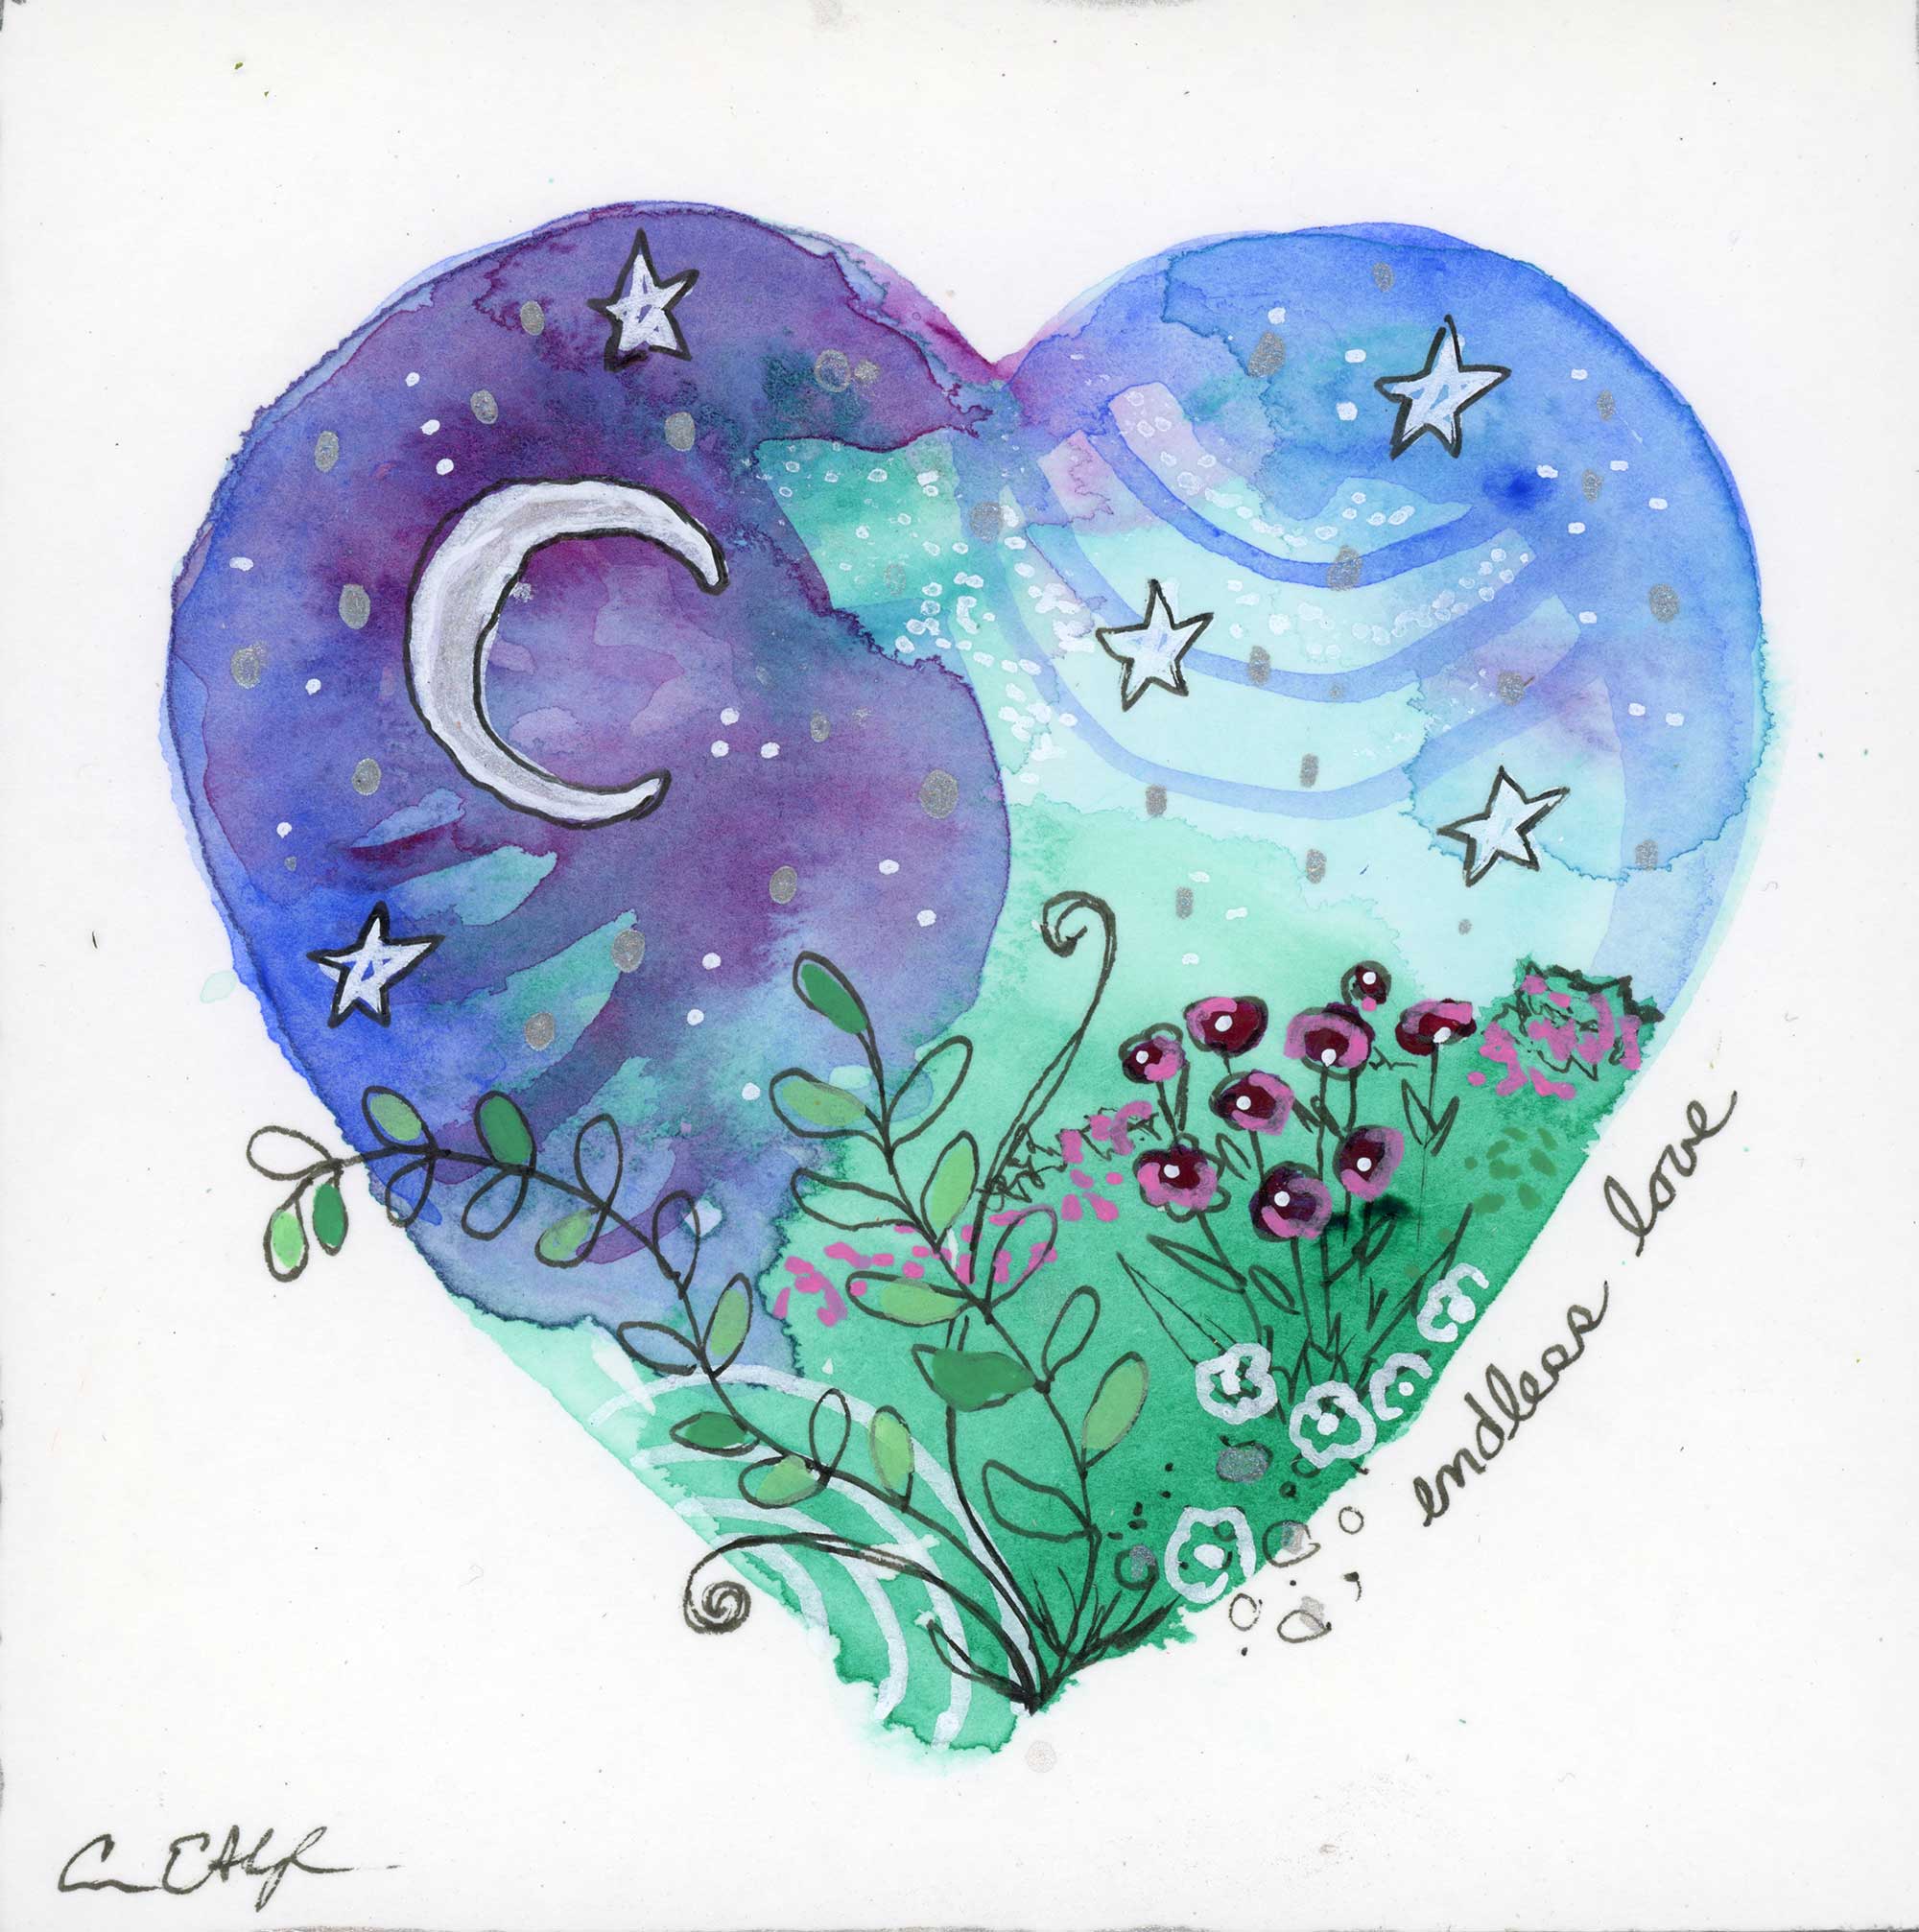 SOLD - Endless Love Heart, 4" x 4", mixed media